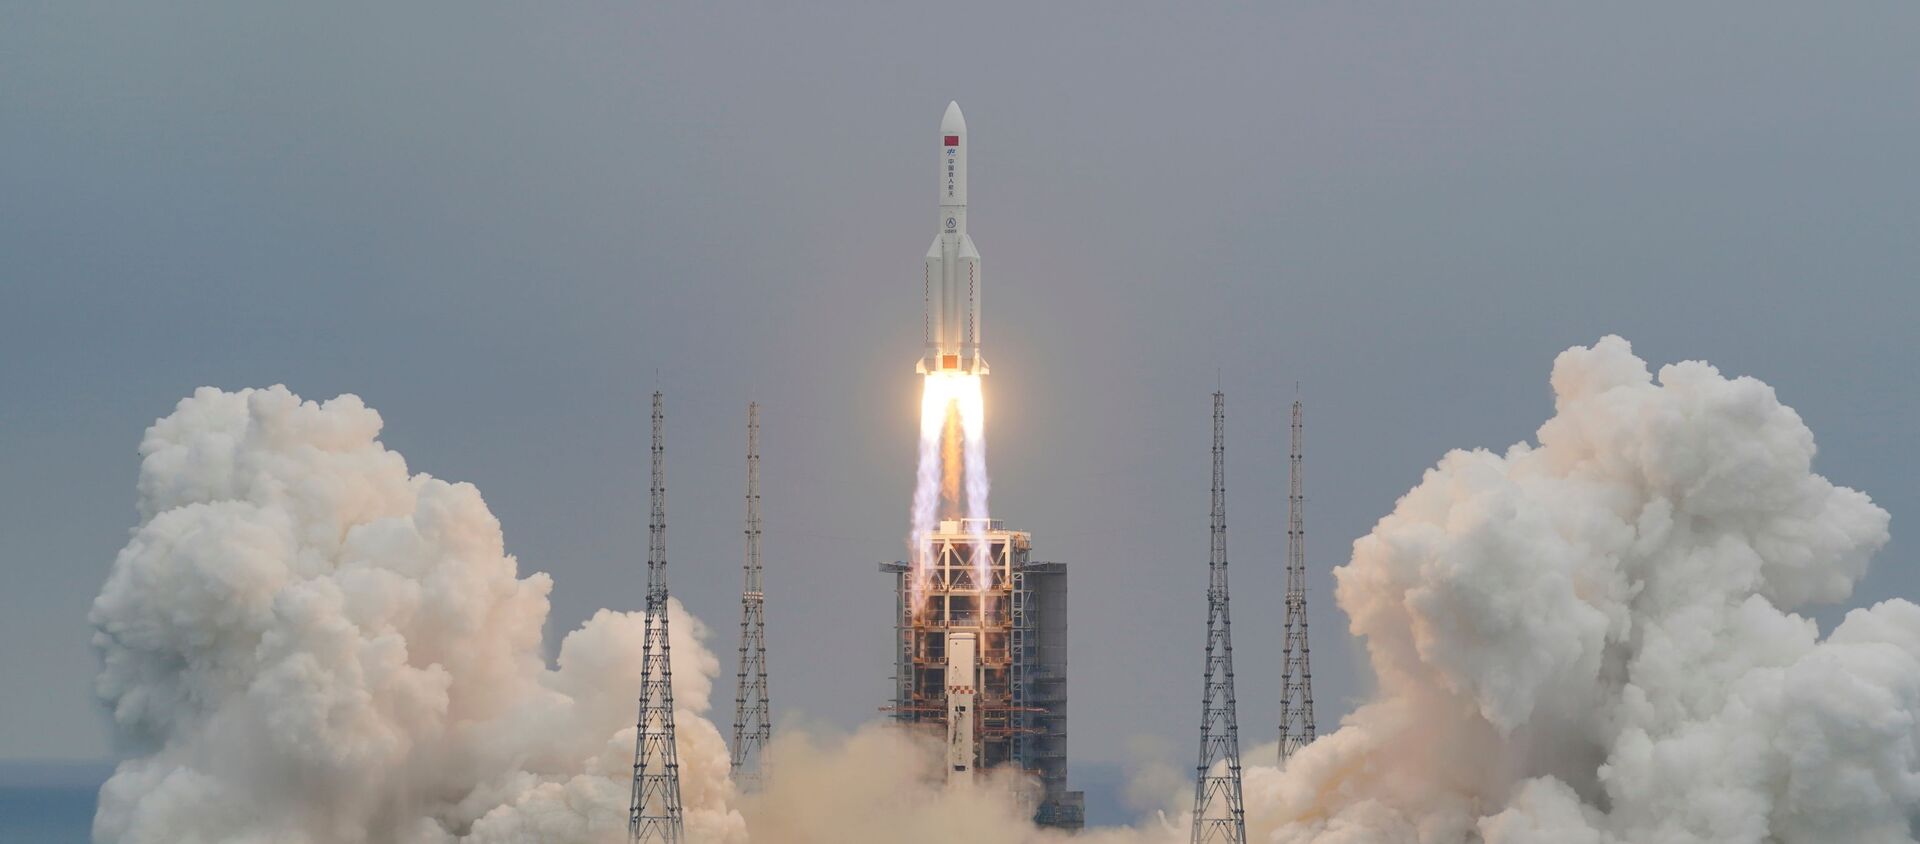 The Long March-5B Y2 rocket, carrying the core module of China's space station Tianhe, takes off from Wenchang Space Launch Center in Hainan province, China April 29, 2021 - Sputnik International, 1920, 09.05.2021